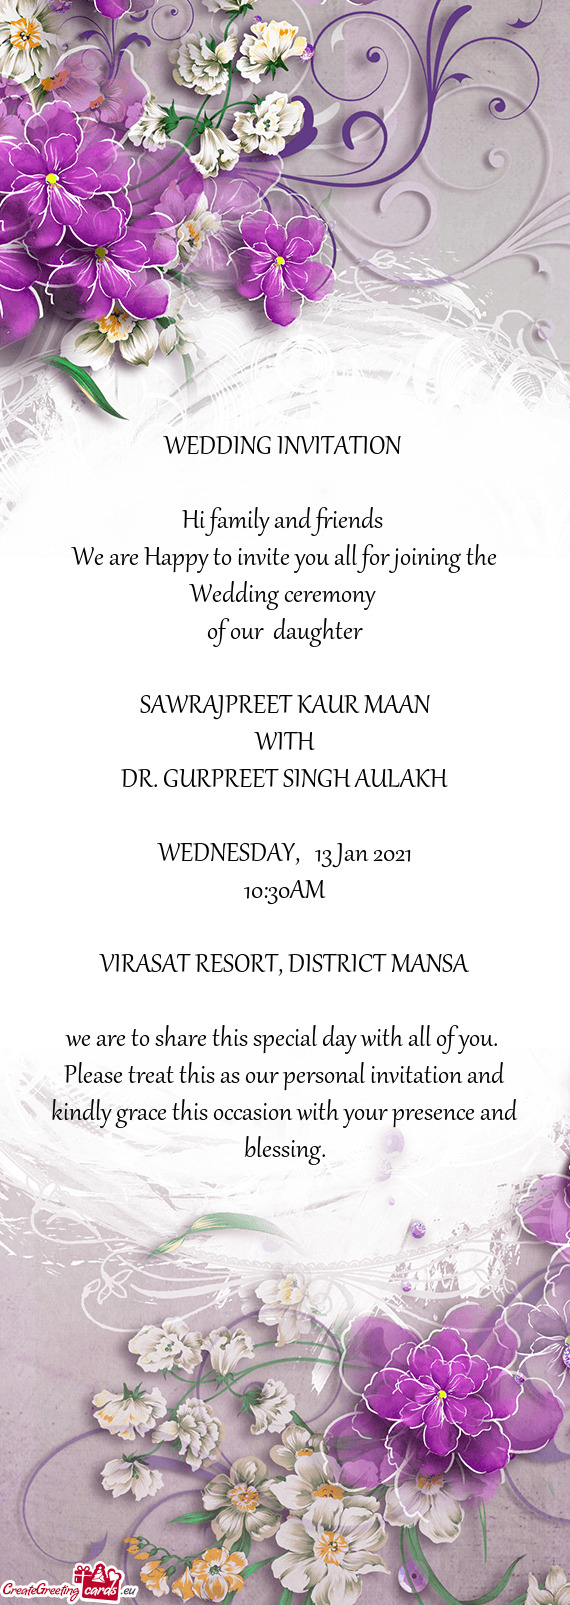 We are Happy to invite you all for joining the Wedding ceremony